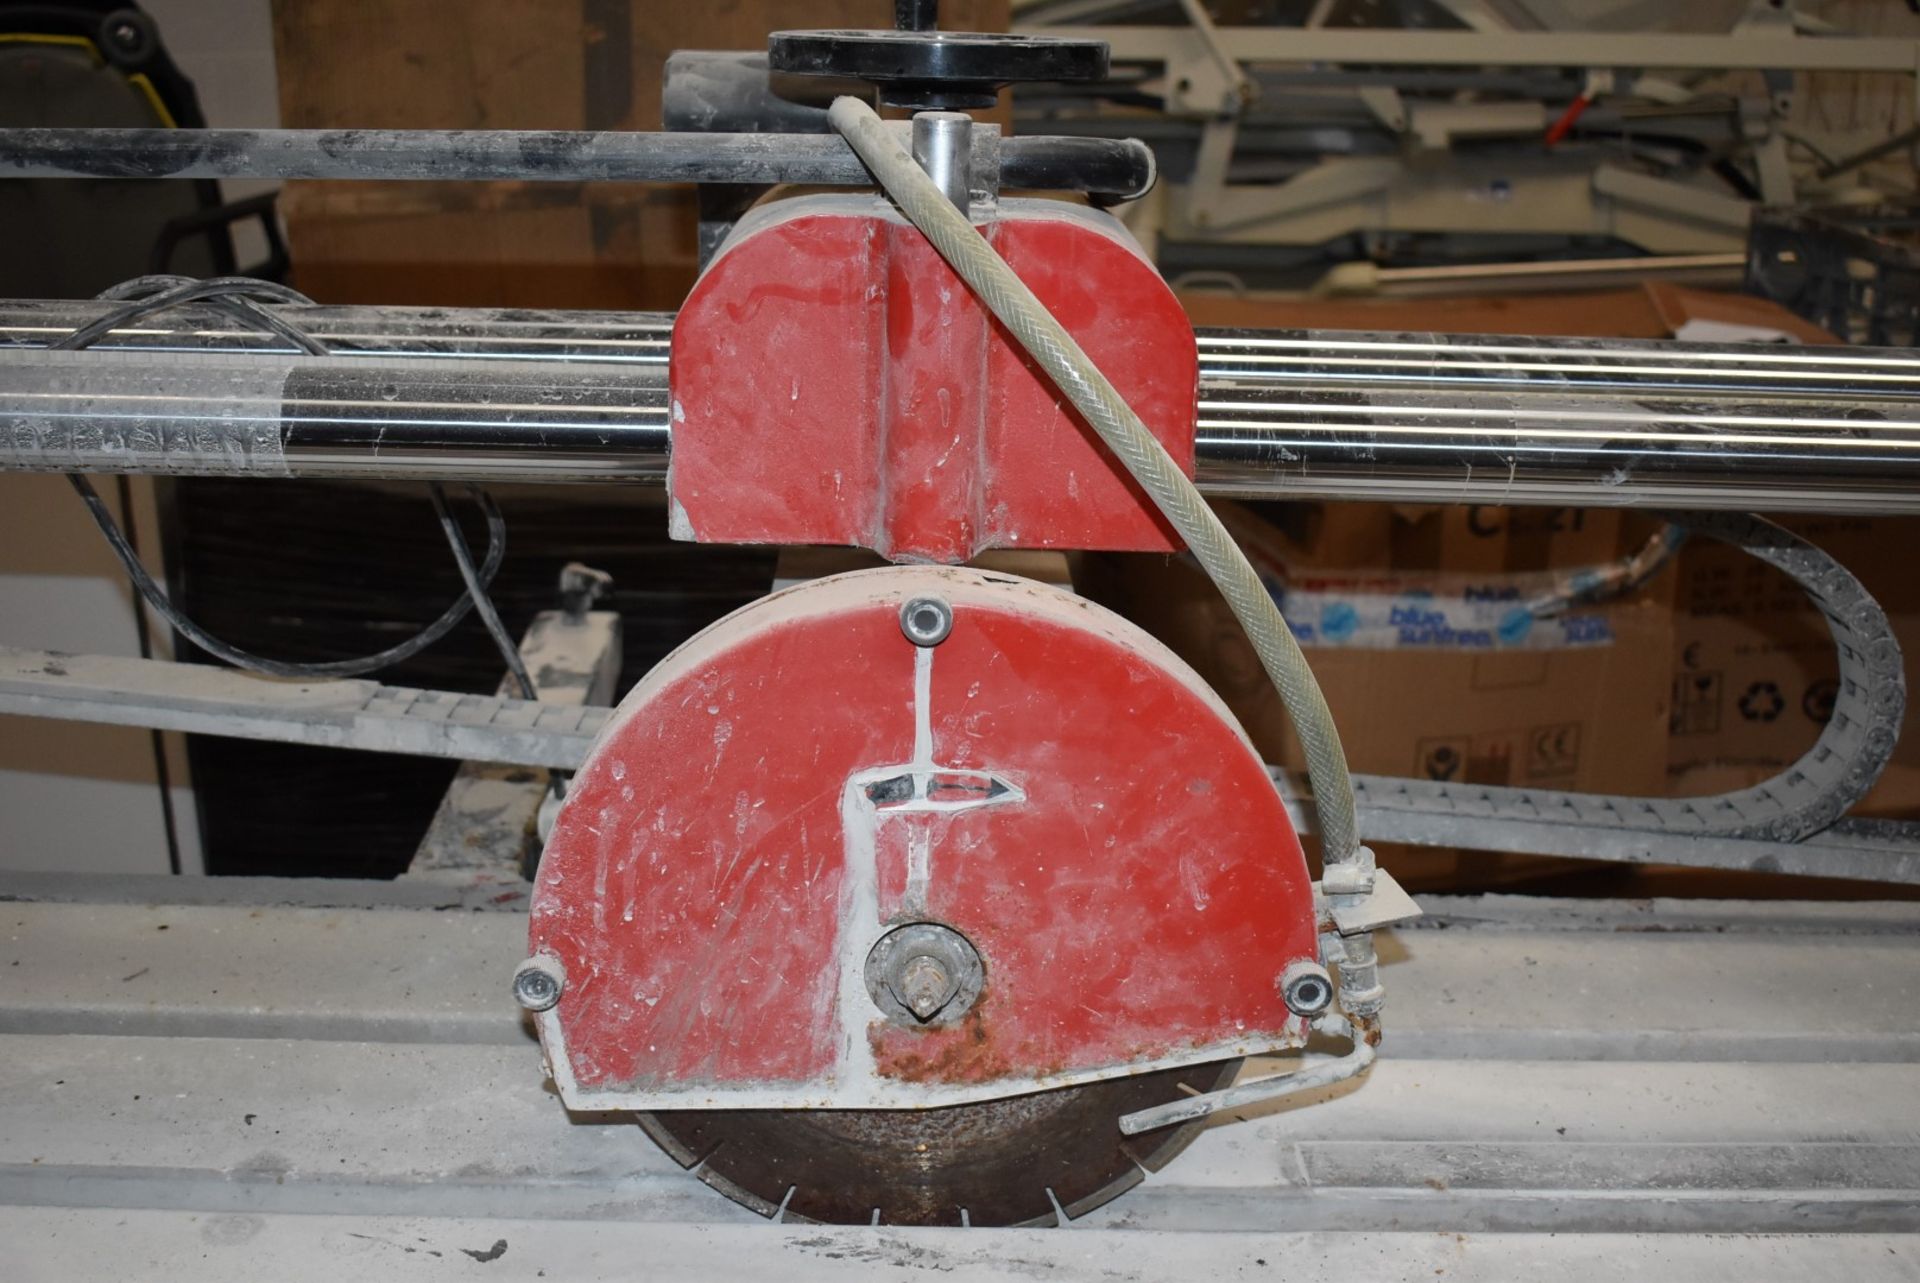 1 x Stone Cutter With 12 Inch Blade and Converyer - Includes Spares Parts Such as Spare Motor - Image 2 of 17